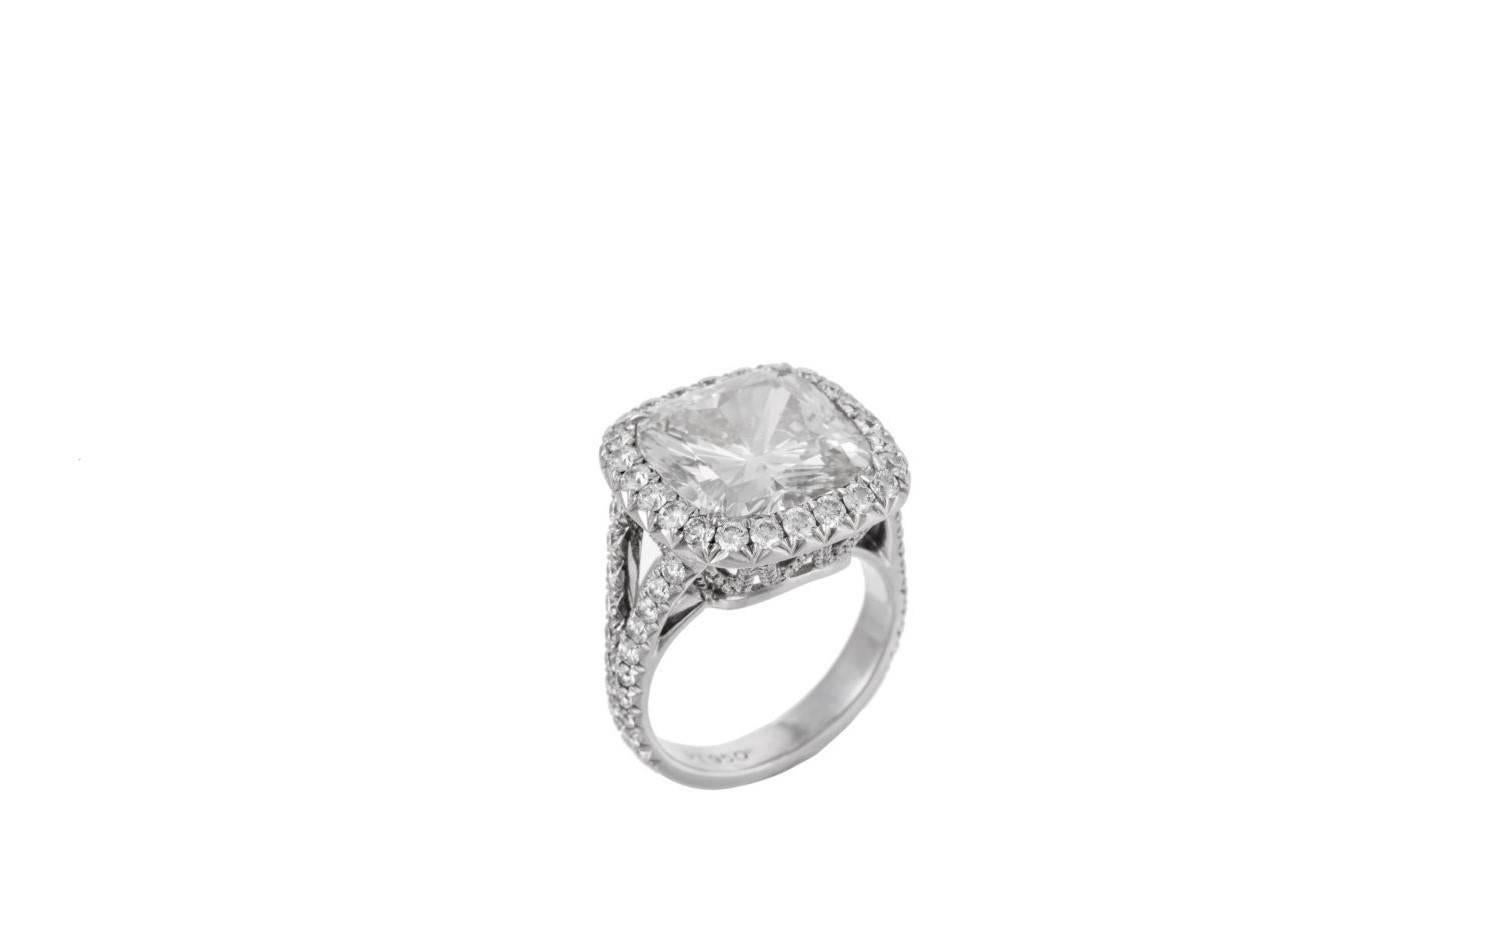 MAGNIFICENT RADIANT CUT DIAMOND RING. EXCLUSIVE WORKMANSHIP. 
THE CENTER STONE IS 8.03 J COLOR, VS2 IN CLARITY. GIA CERTIFIED.
SURROUNDED BY 2.50 CT. MICROPAVE DIAMOND HALO